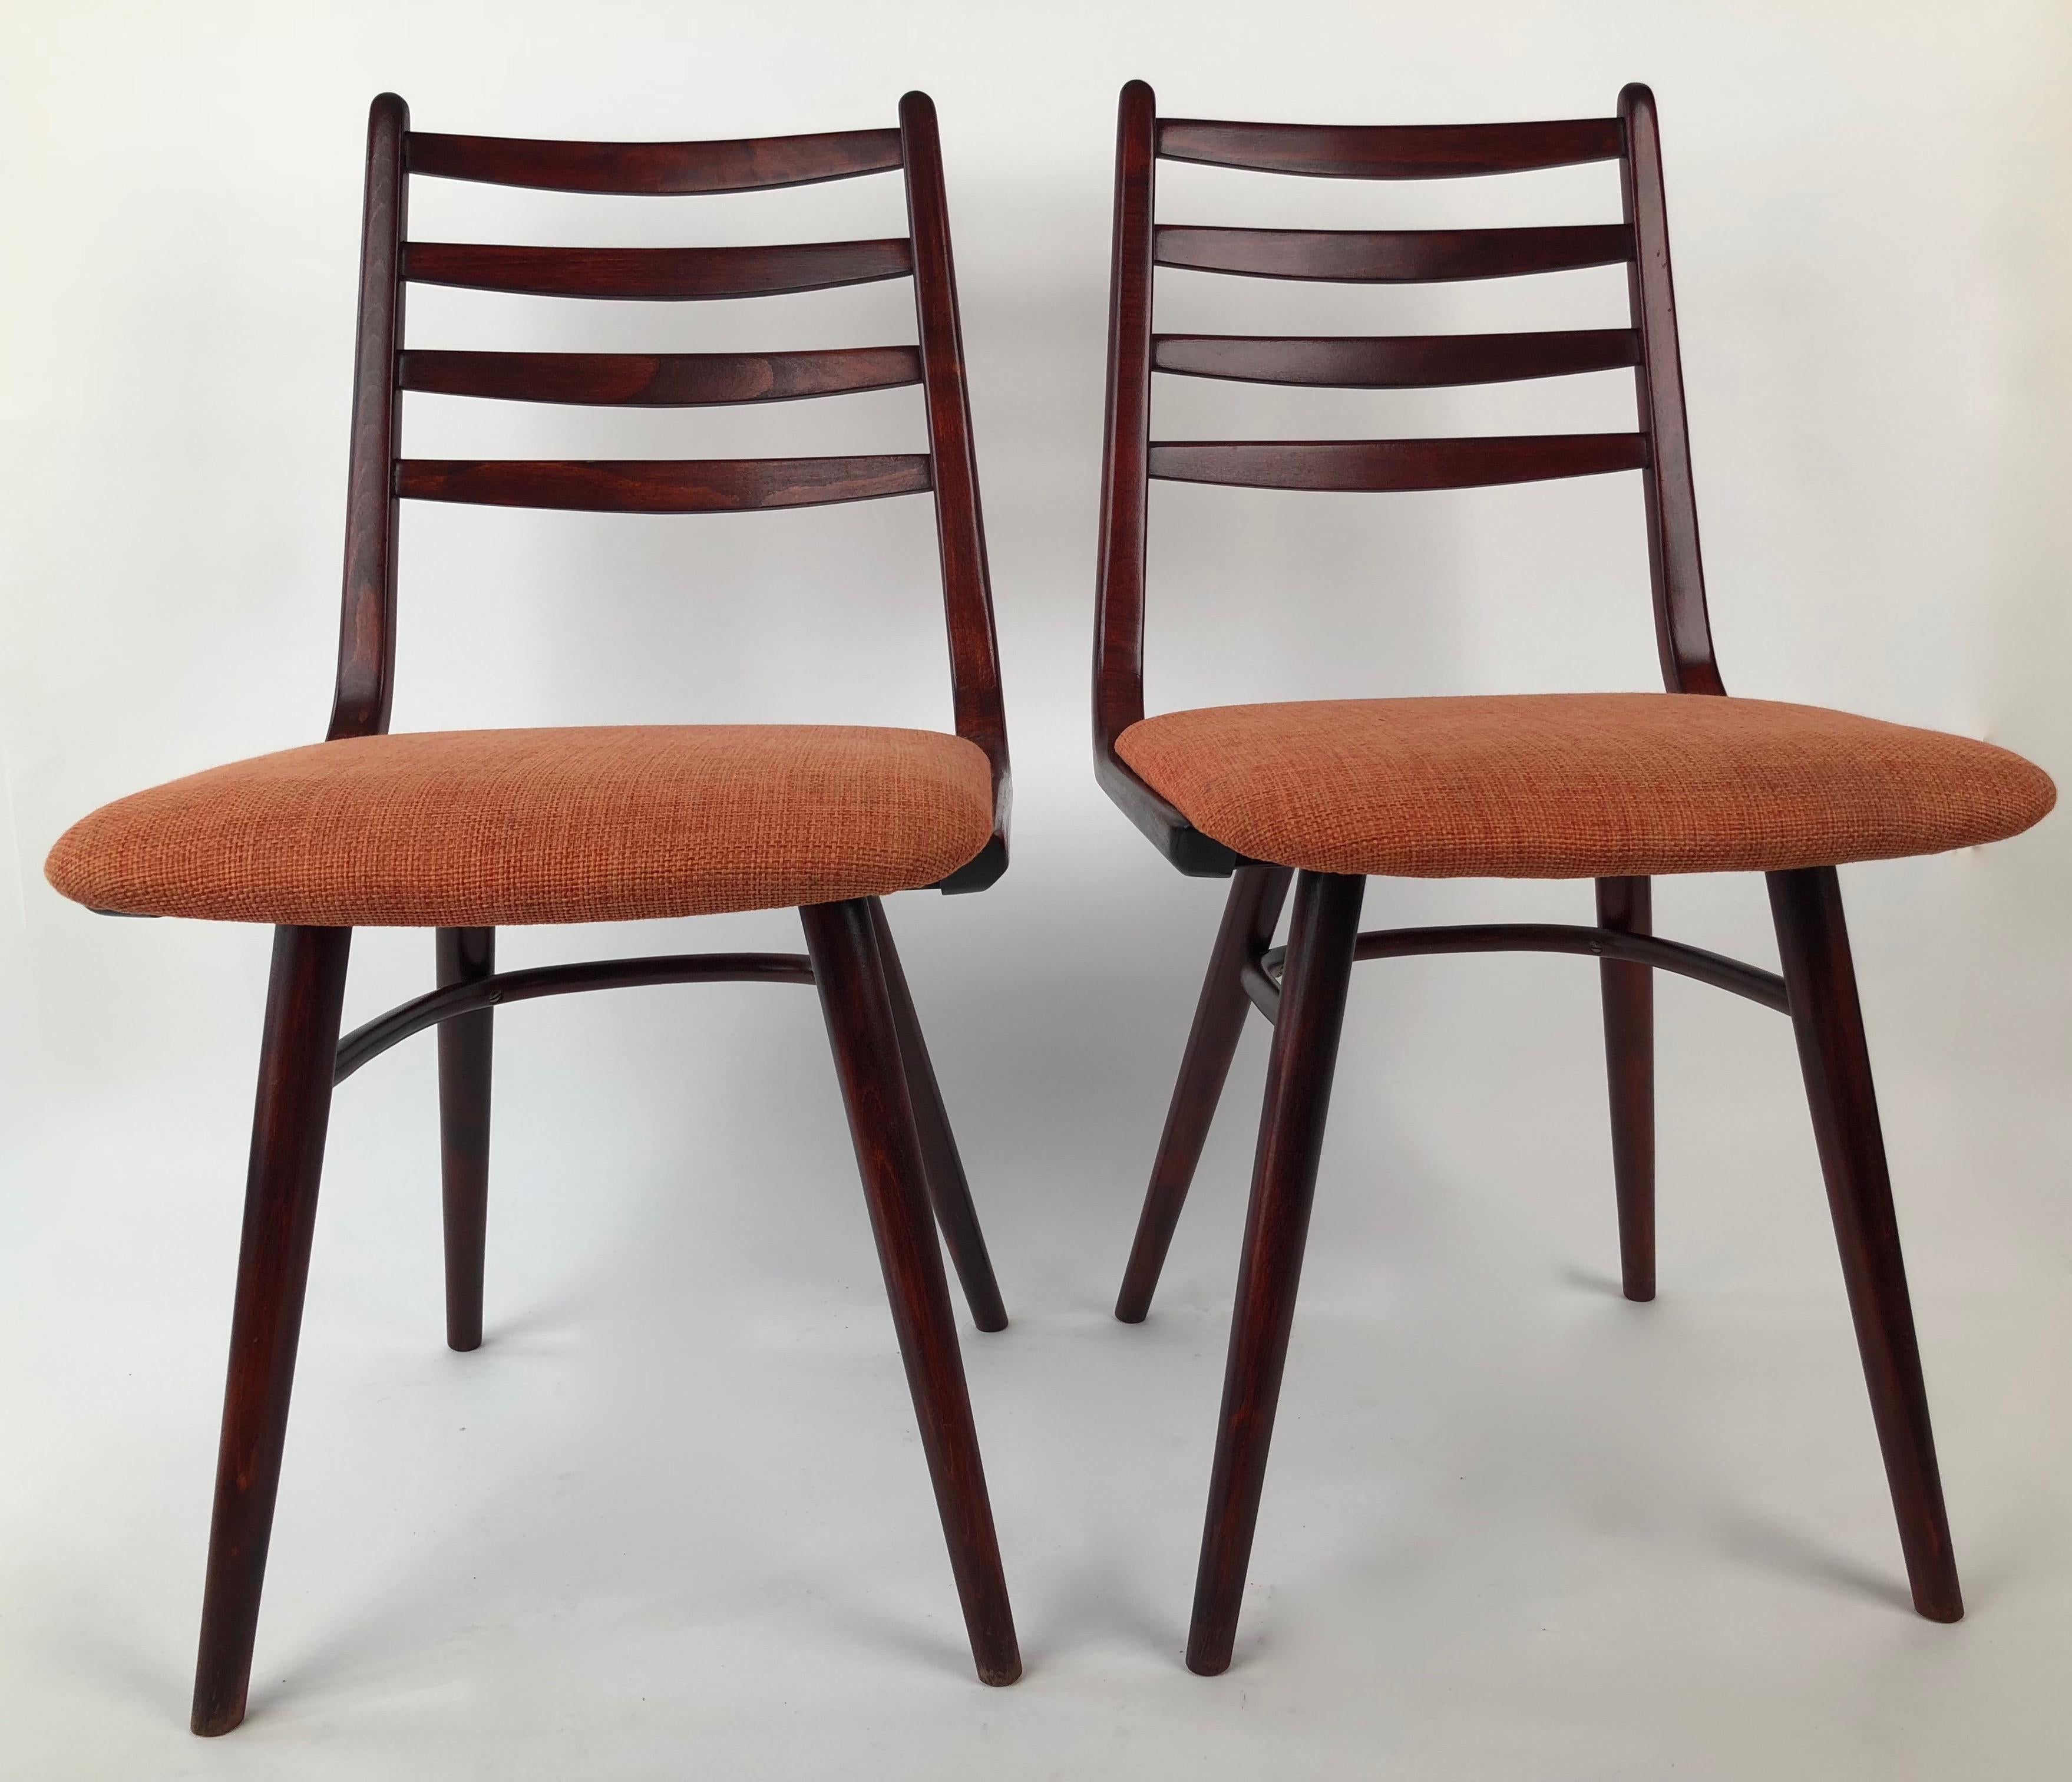 Set of 4 Dinning Chairs, 1970's, Thonet Factory For Sale 12